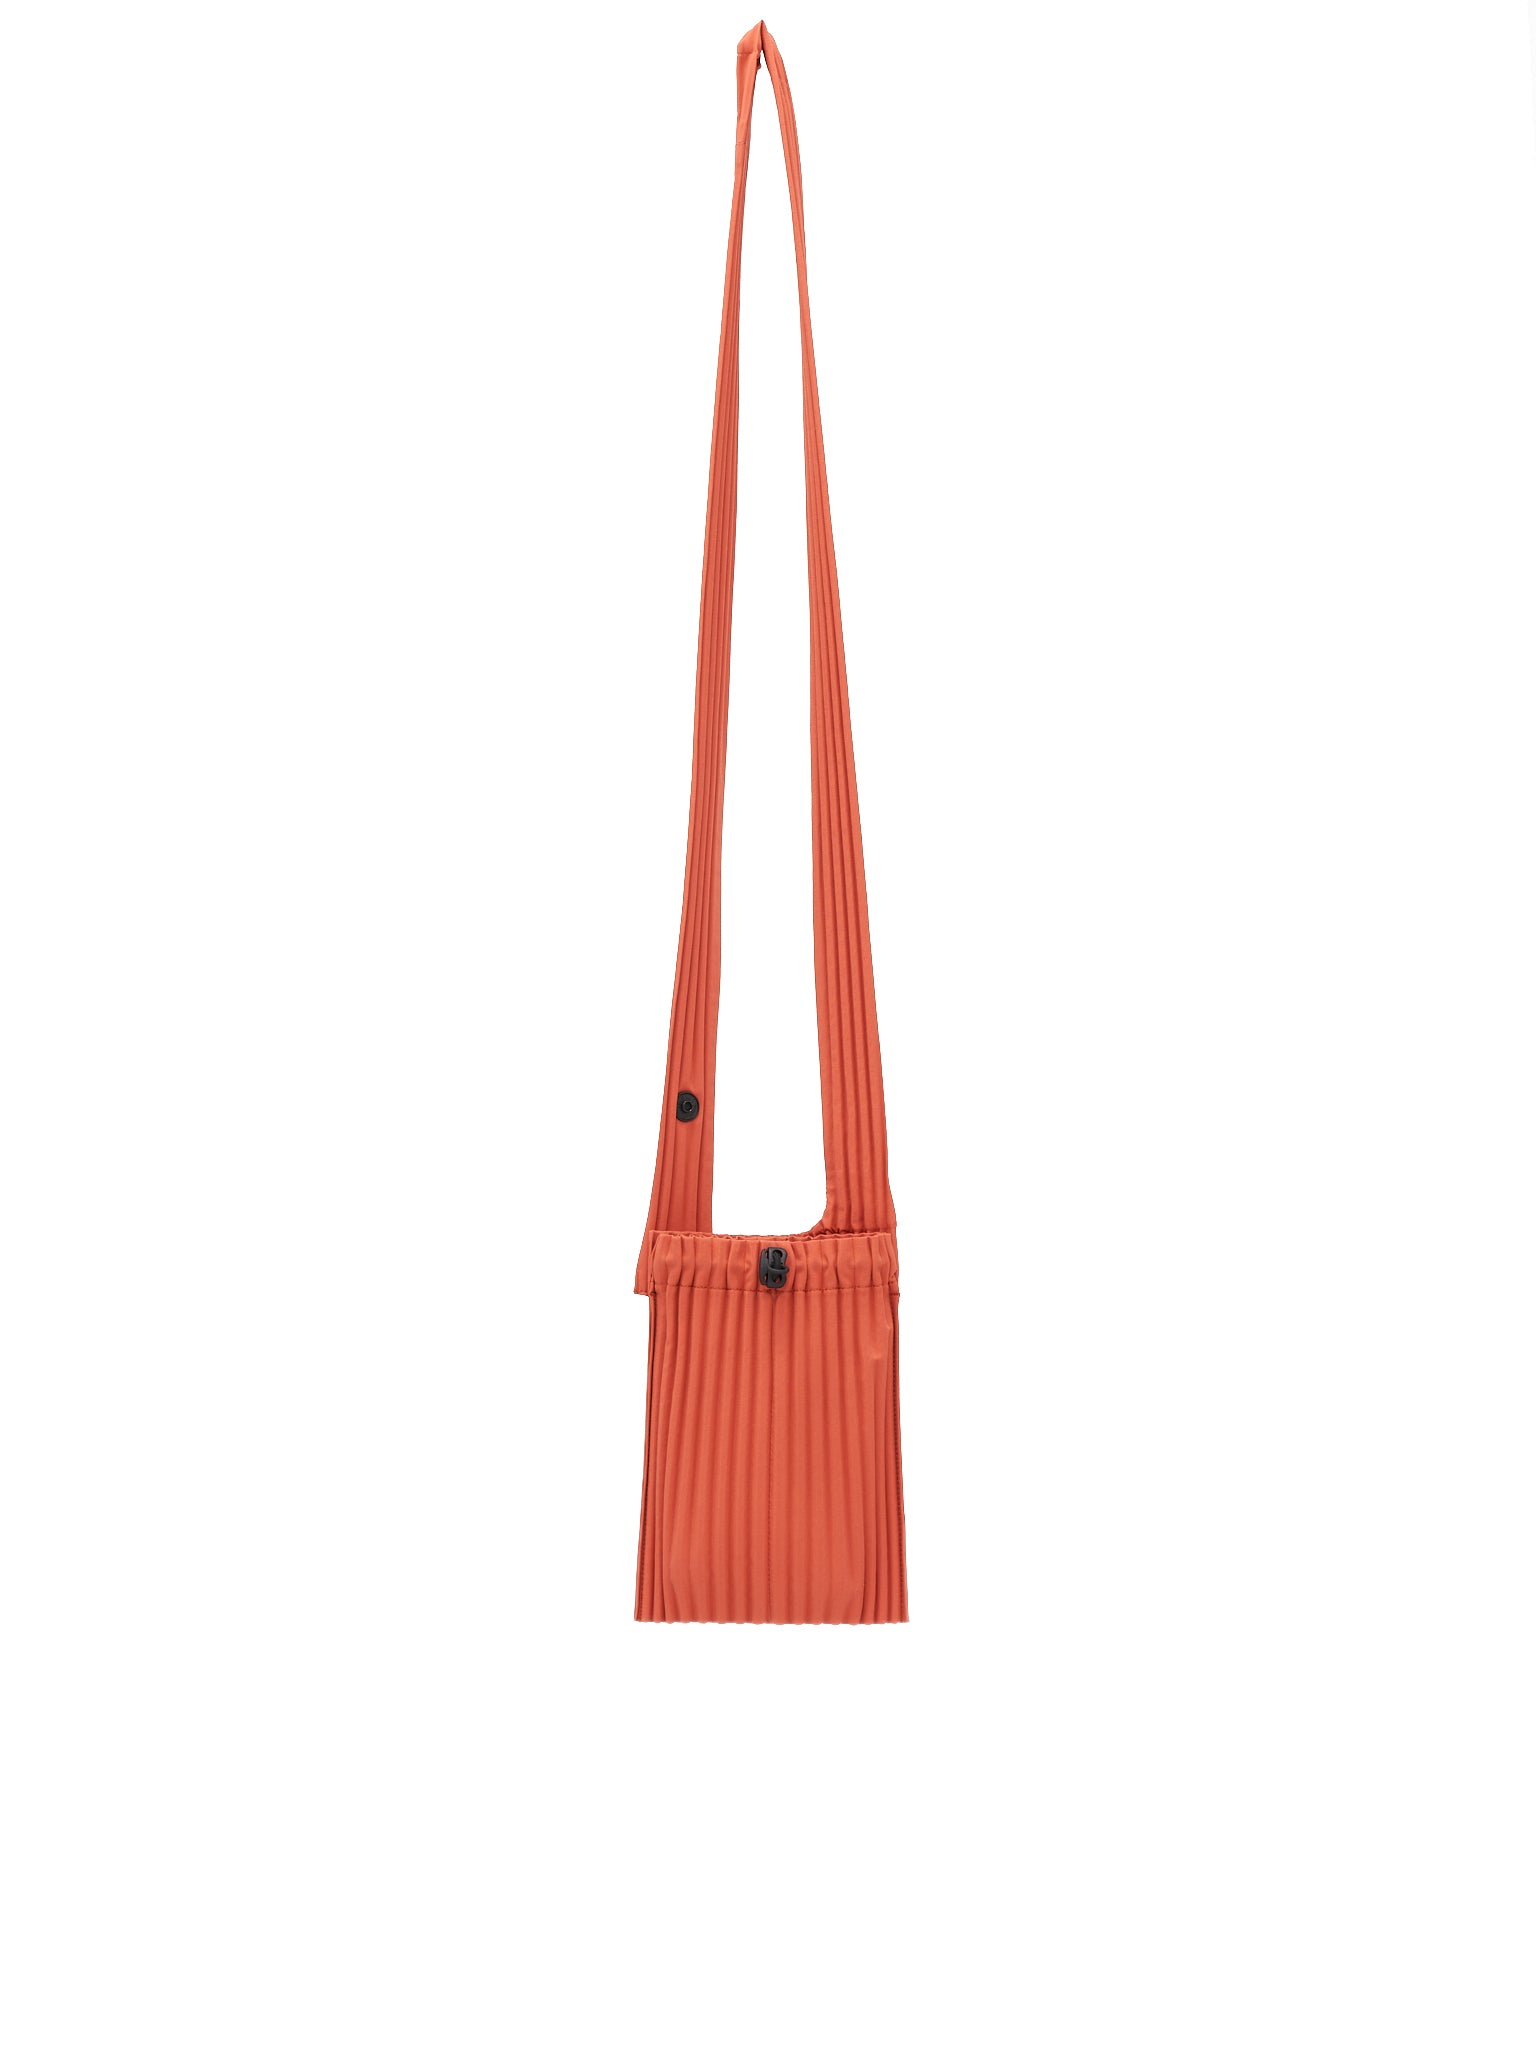 PLEATS TOTE BAG, The official ISSEY MIYAKE ONLINE STORE